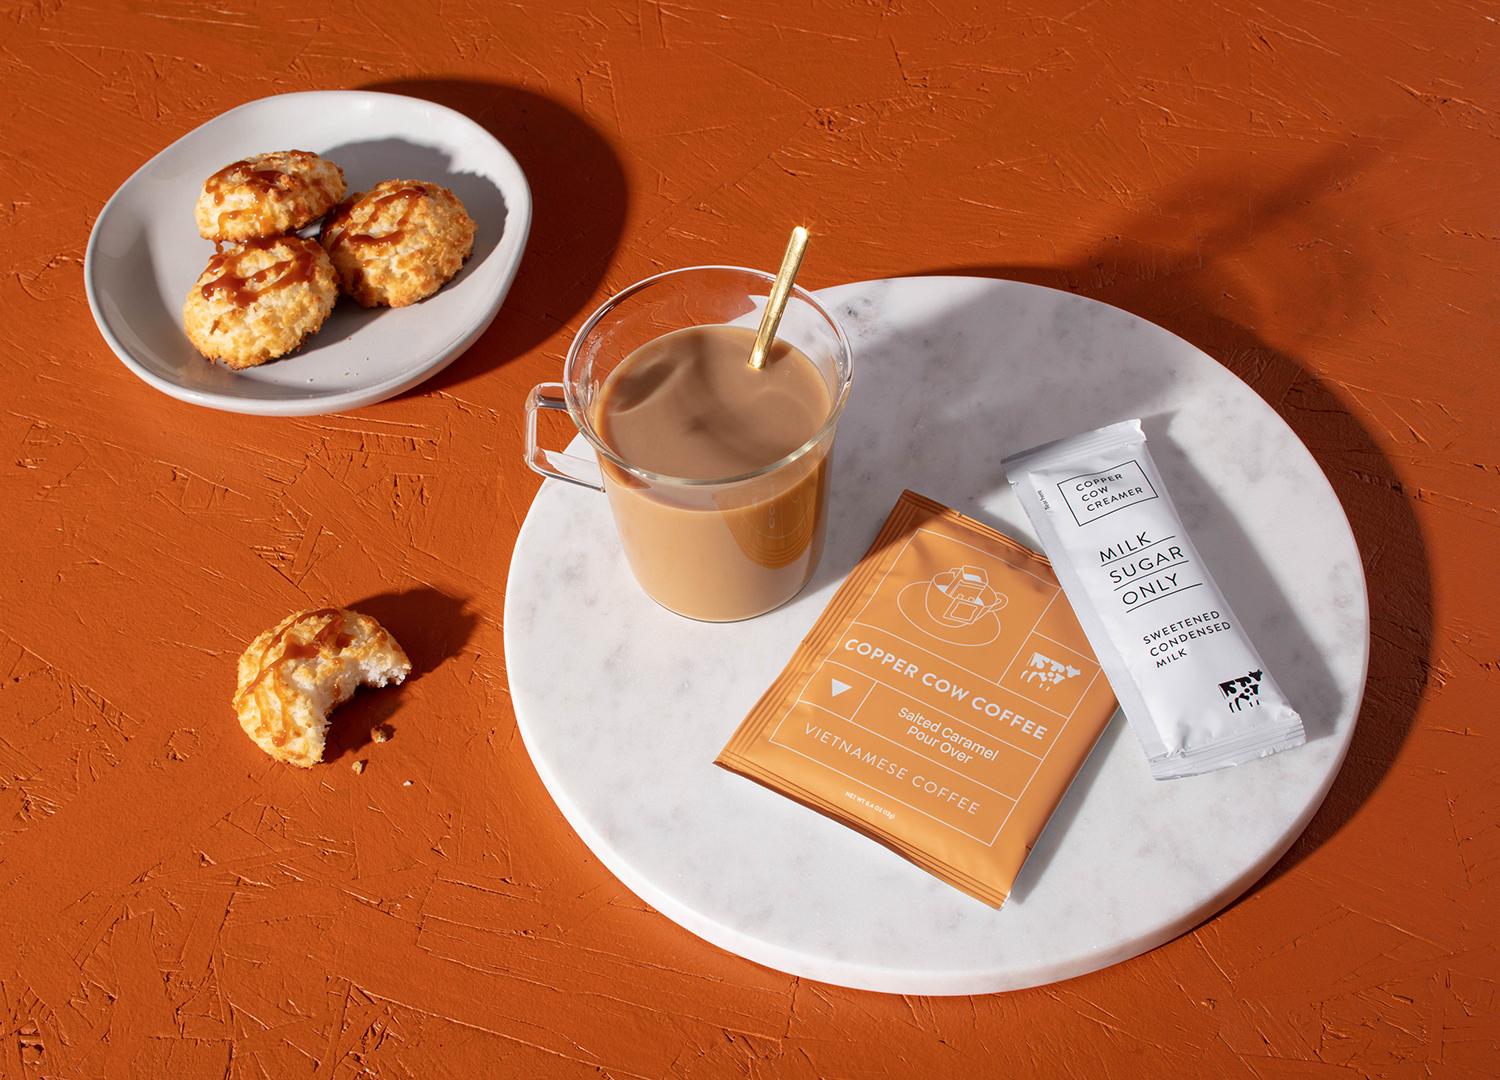 Latte in clear glass mug with spoon sitting next to salted caramel coffee pouch and a creamer packet on a round marble surface next to 1 cookie on the table and 3 cookies on a plate.